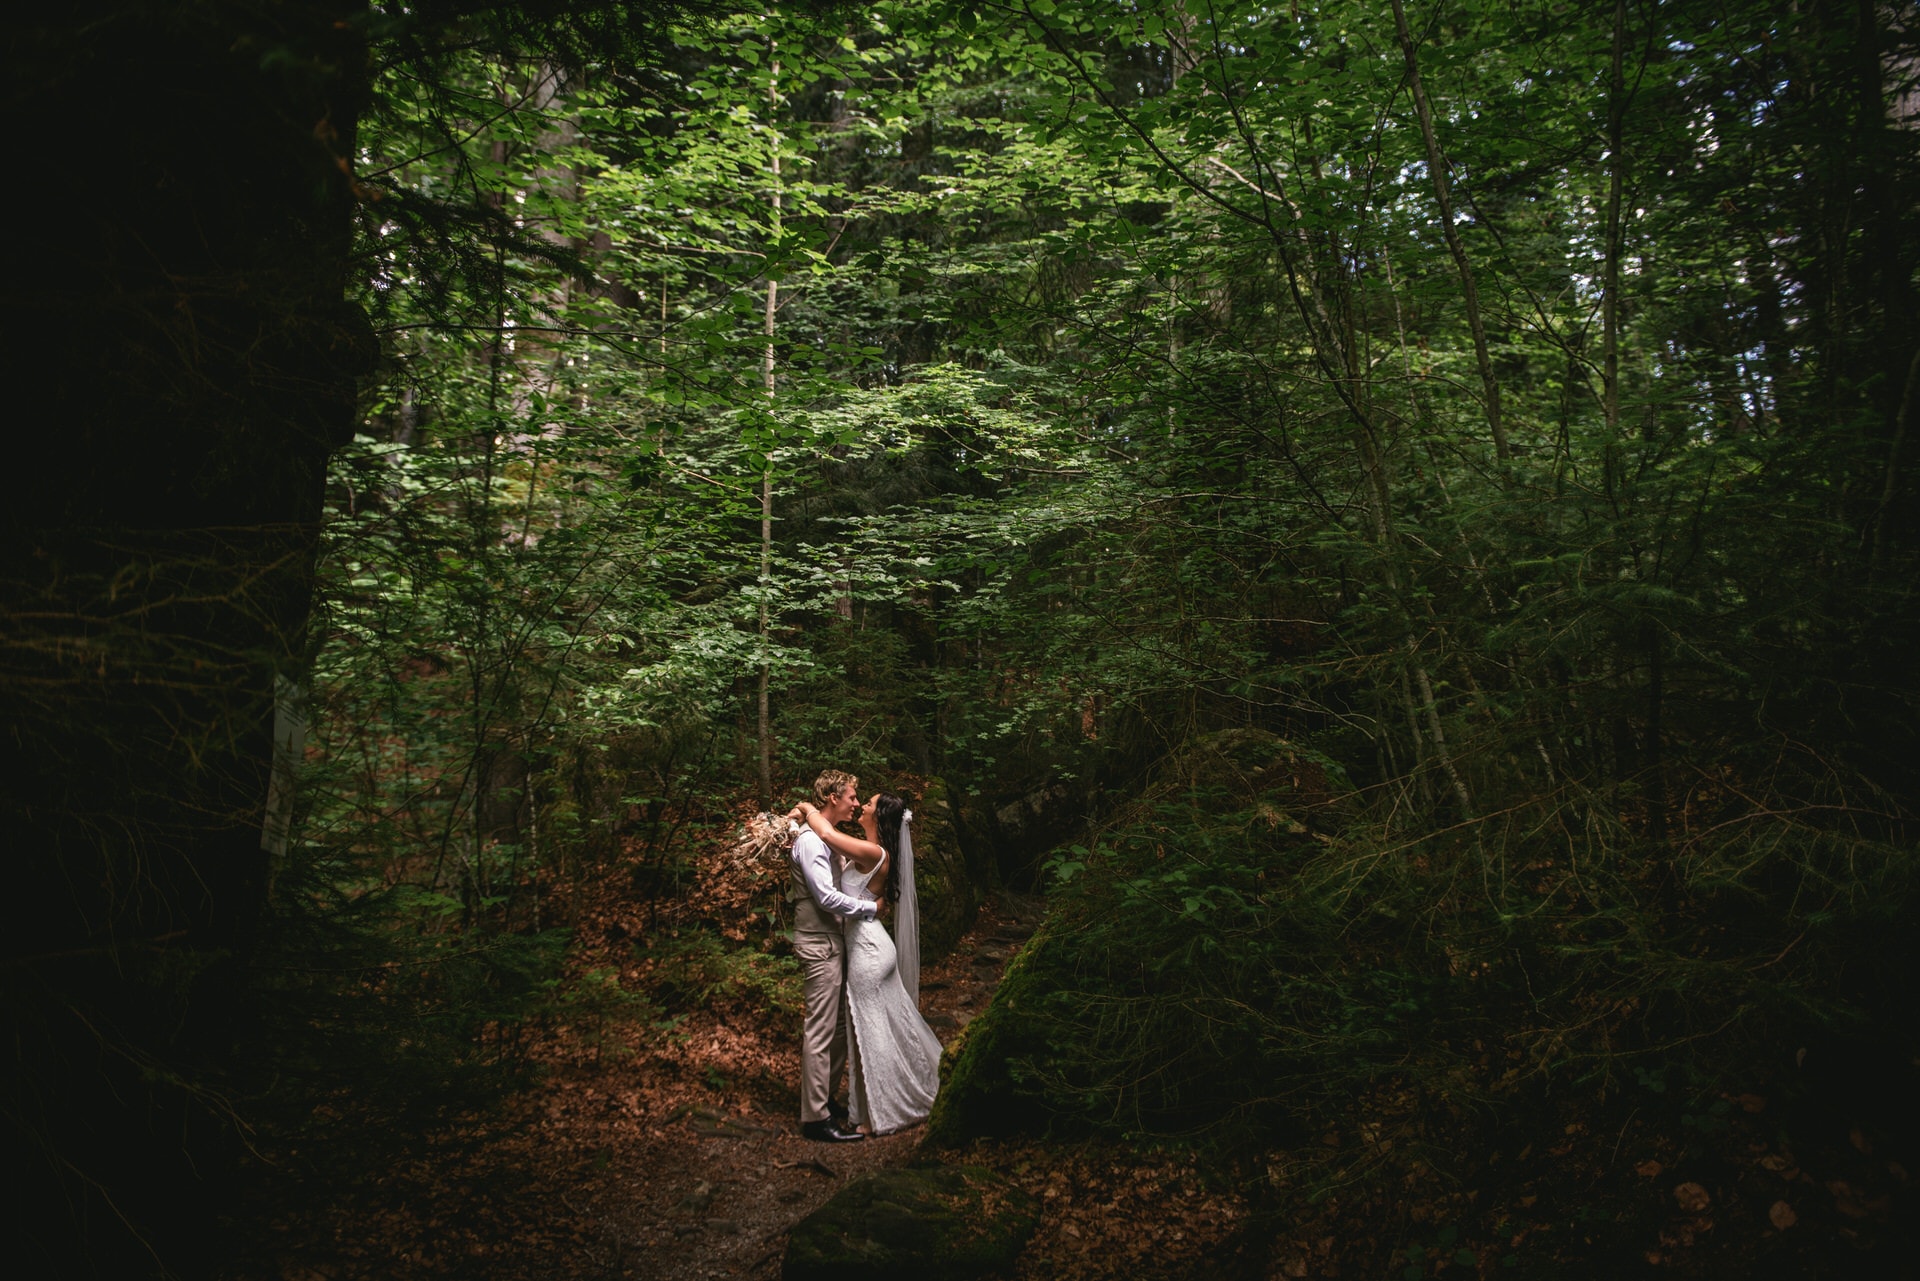 Vows etched amidst alpine serenity - a breathtaking hiking elopement.